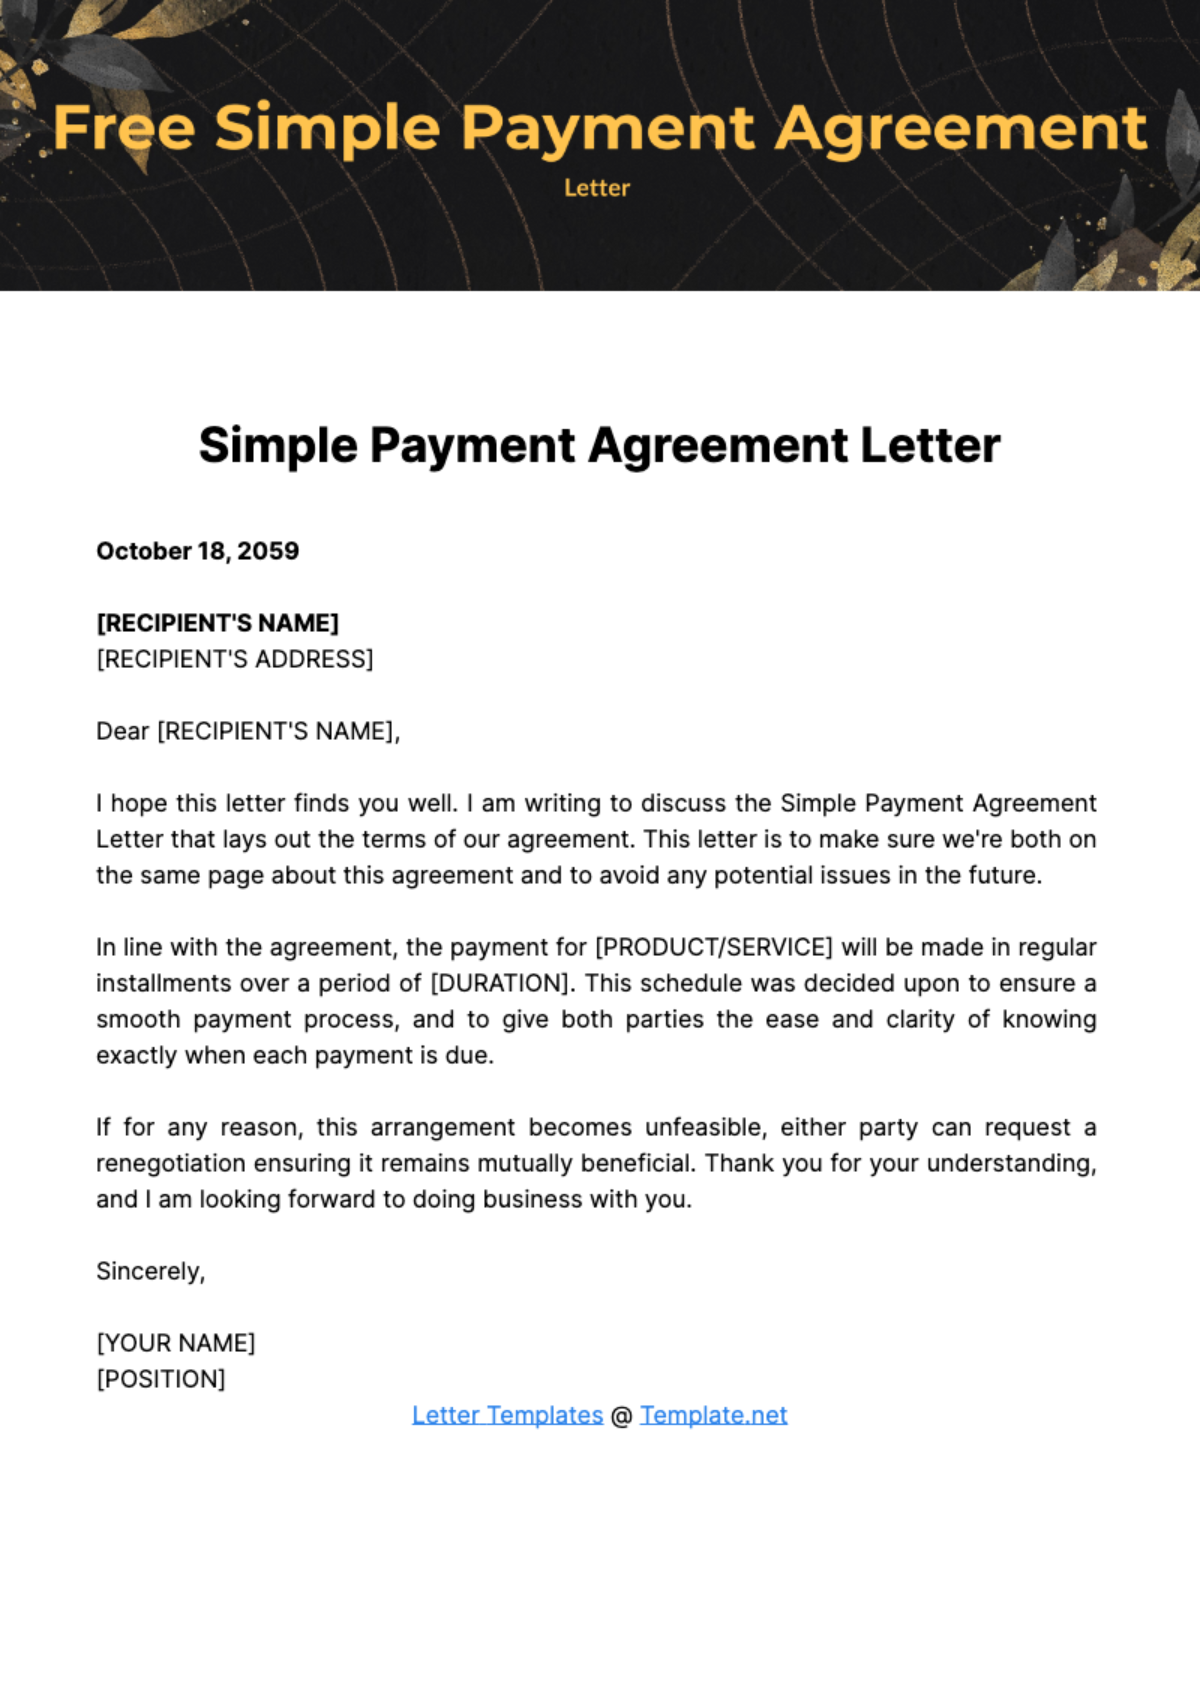 Free Simple Payment Agreement Letter Template